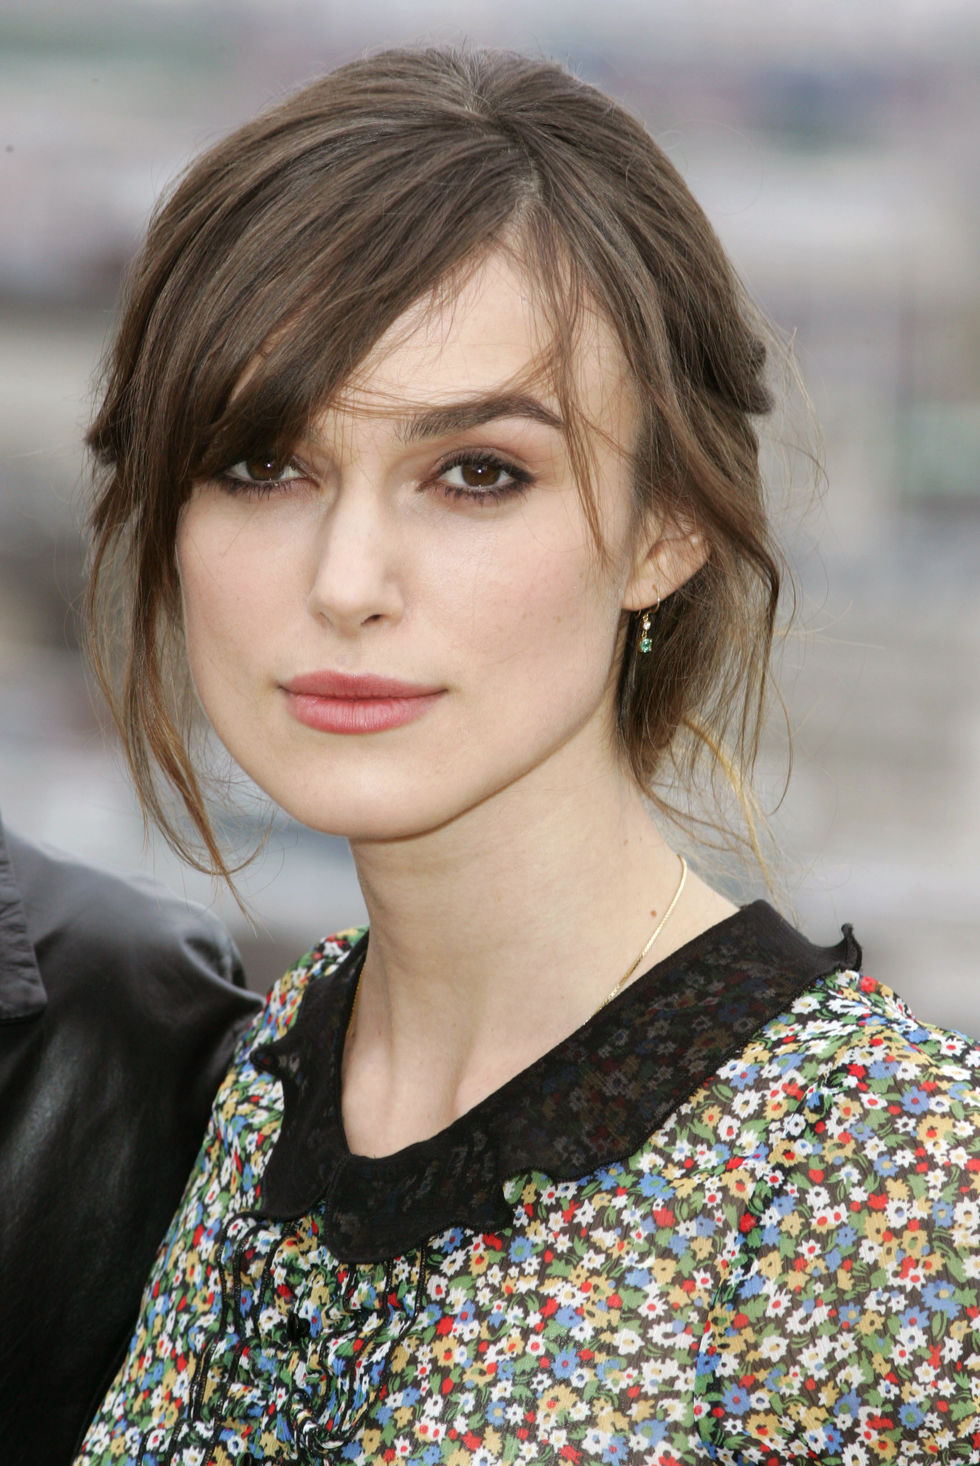 Miller and Keira Knightley